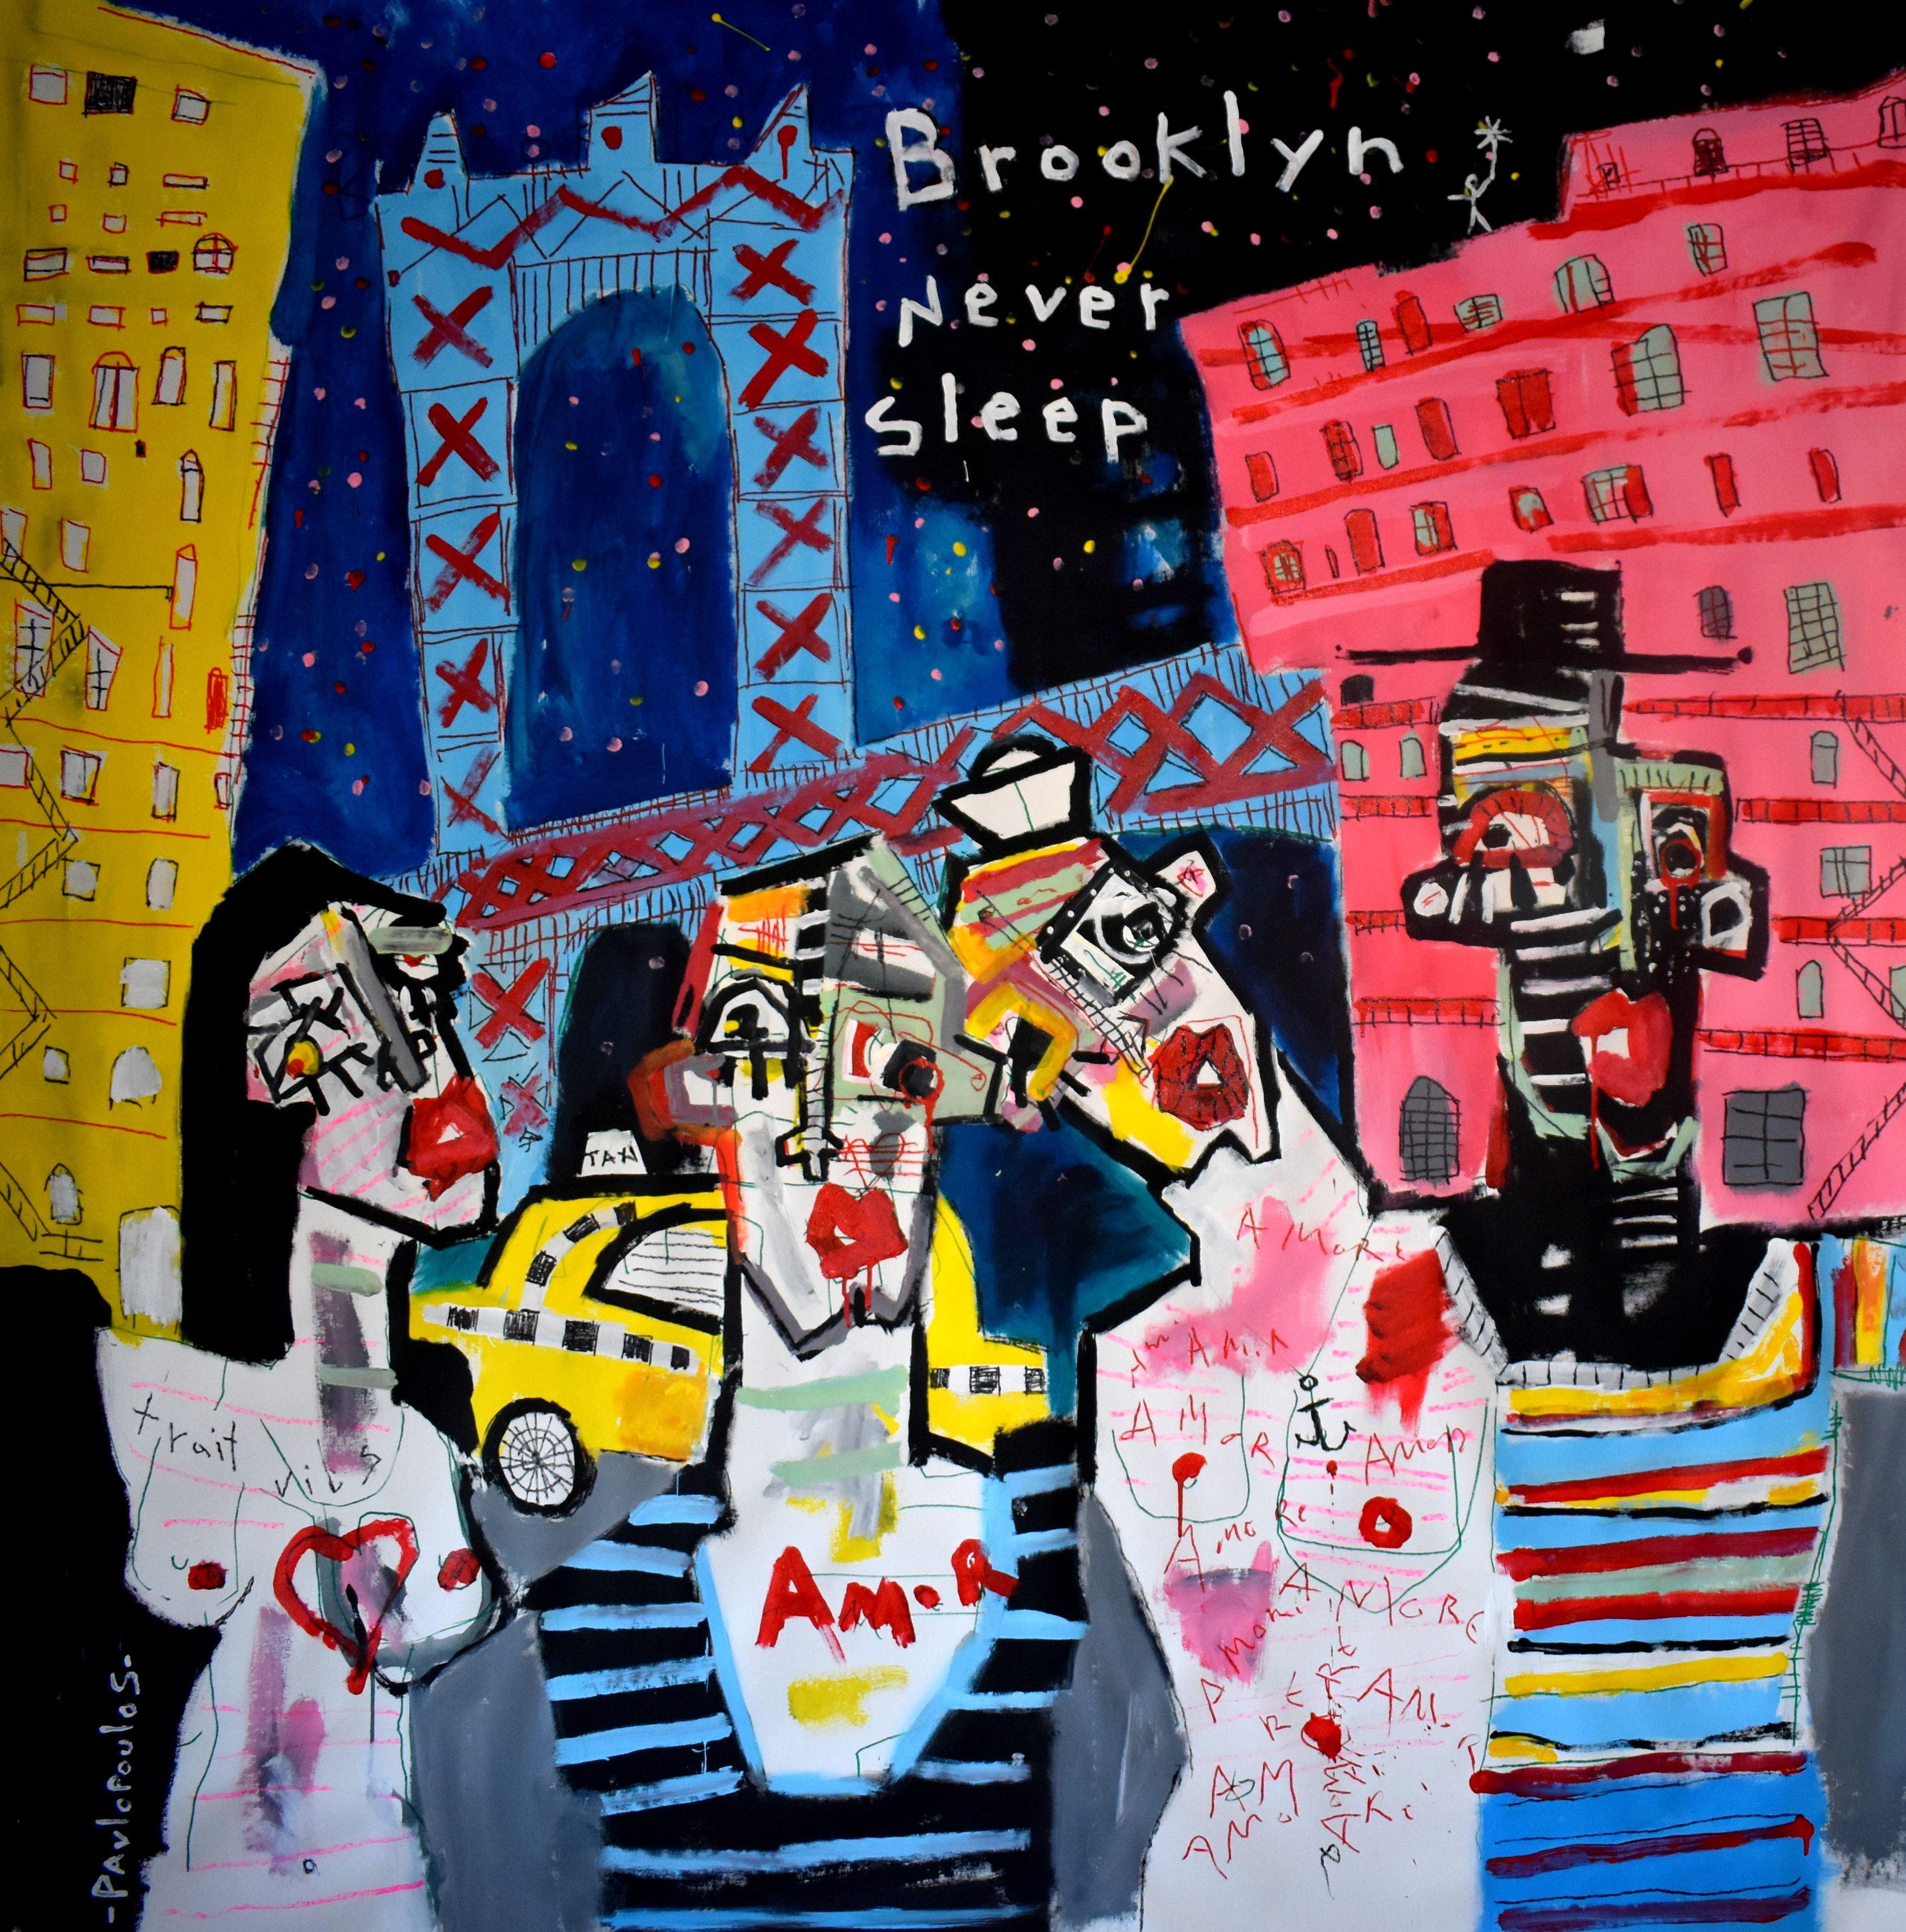 Dimitris Pavlopoulos Abstract Painting - Brooklyn Never Sleep, Painting, Acrylic on Paper